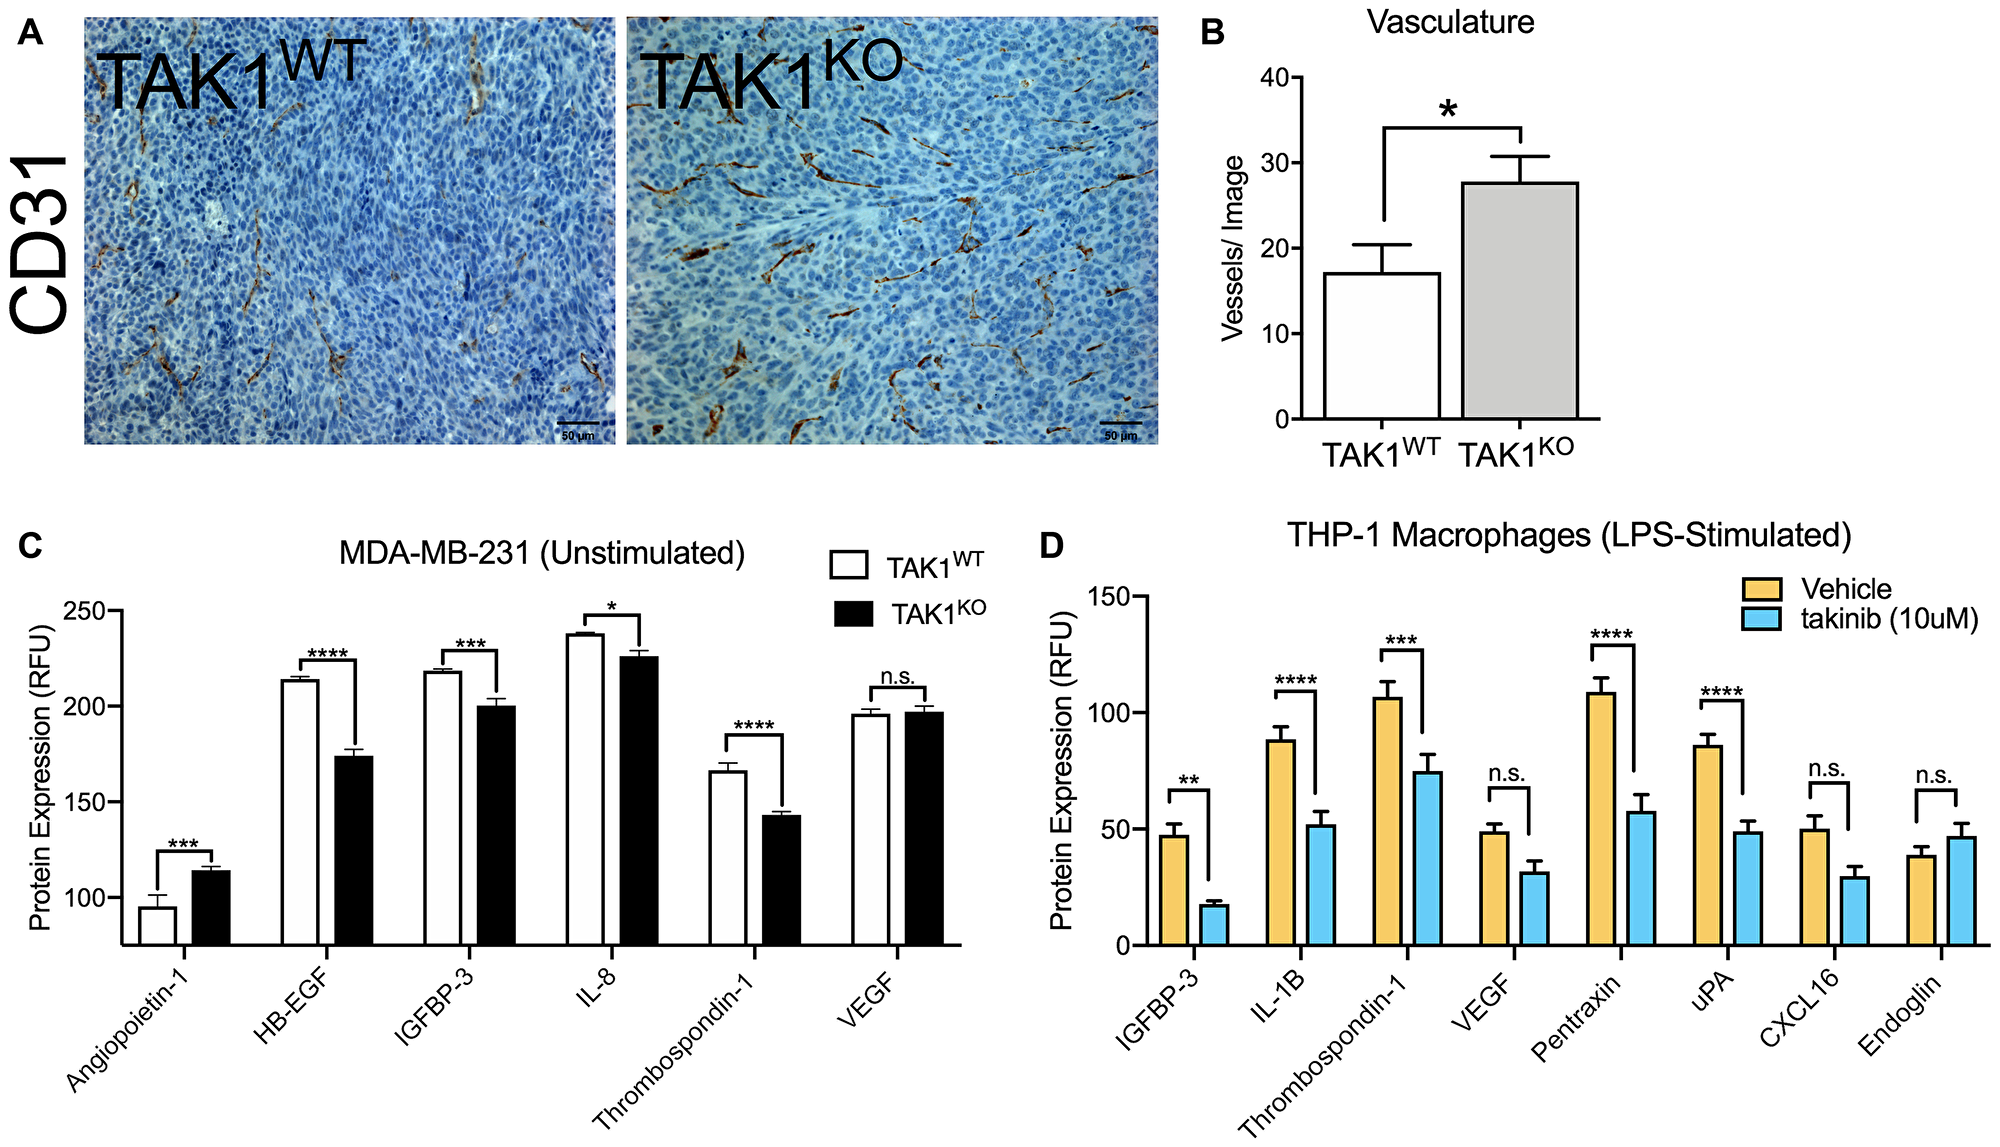 The role of TAK1 in cancer cell and macrophage vasculature.